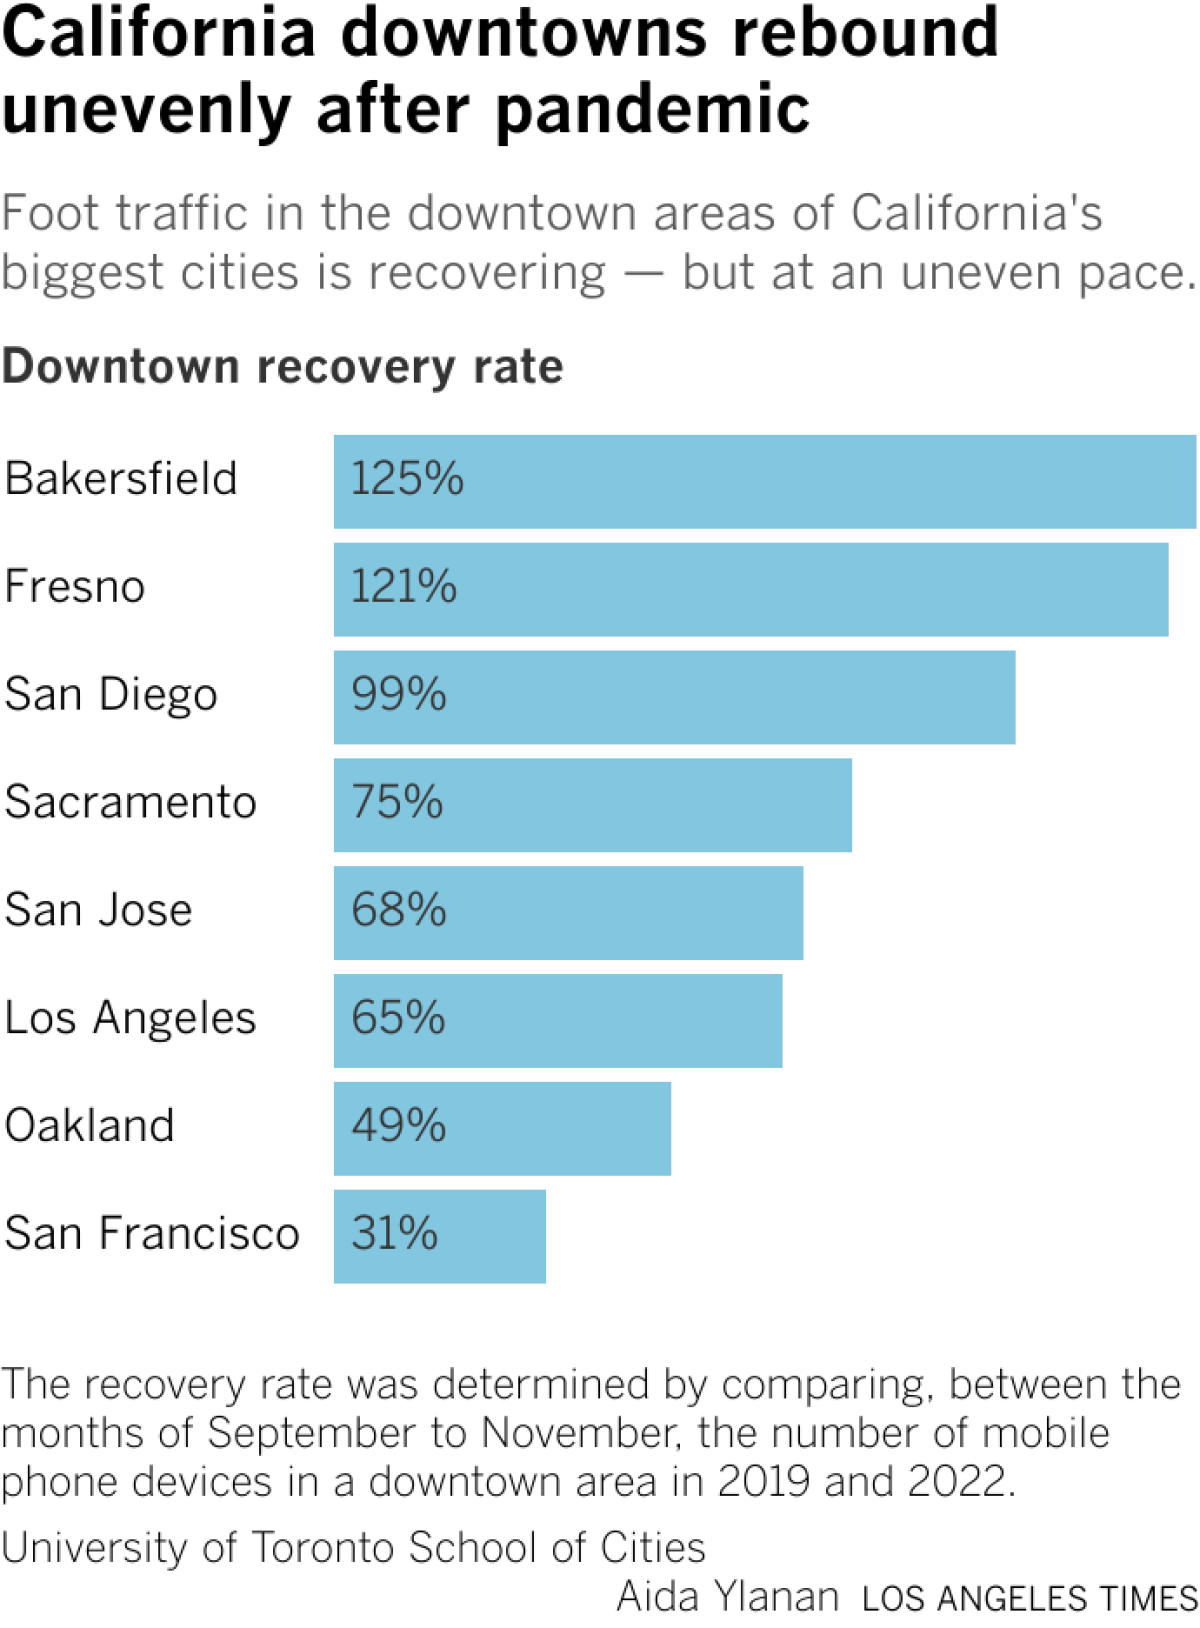 Foot traffic in the downtown areas of California's biggest cities is recovering — but at an uneven pace.